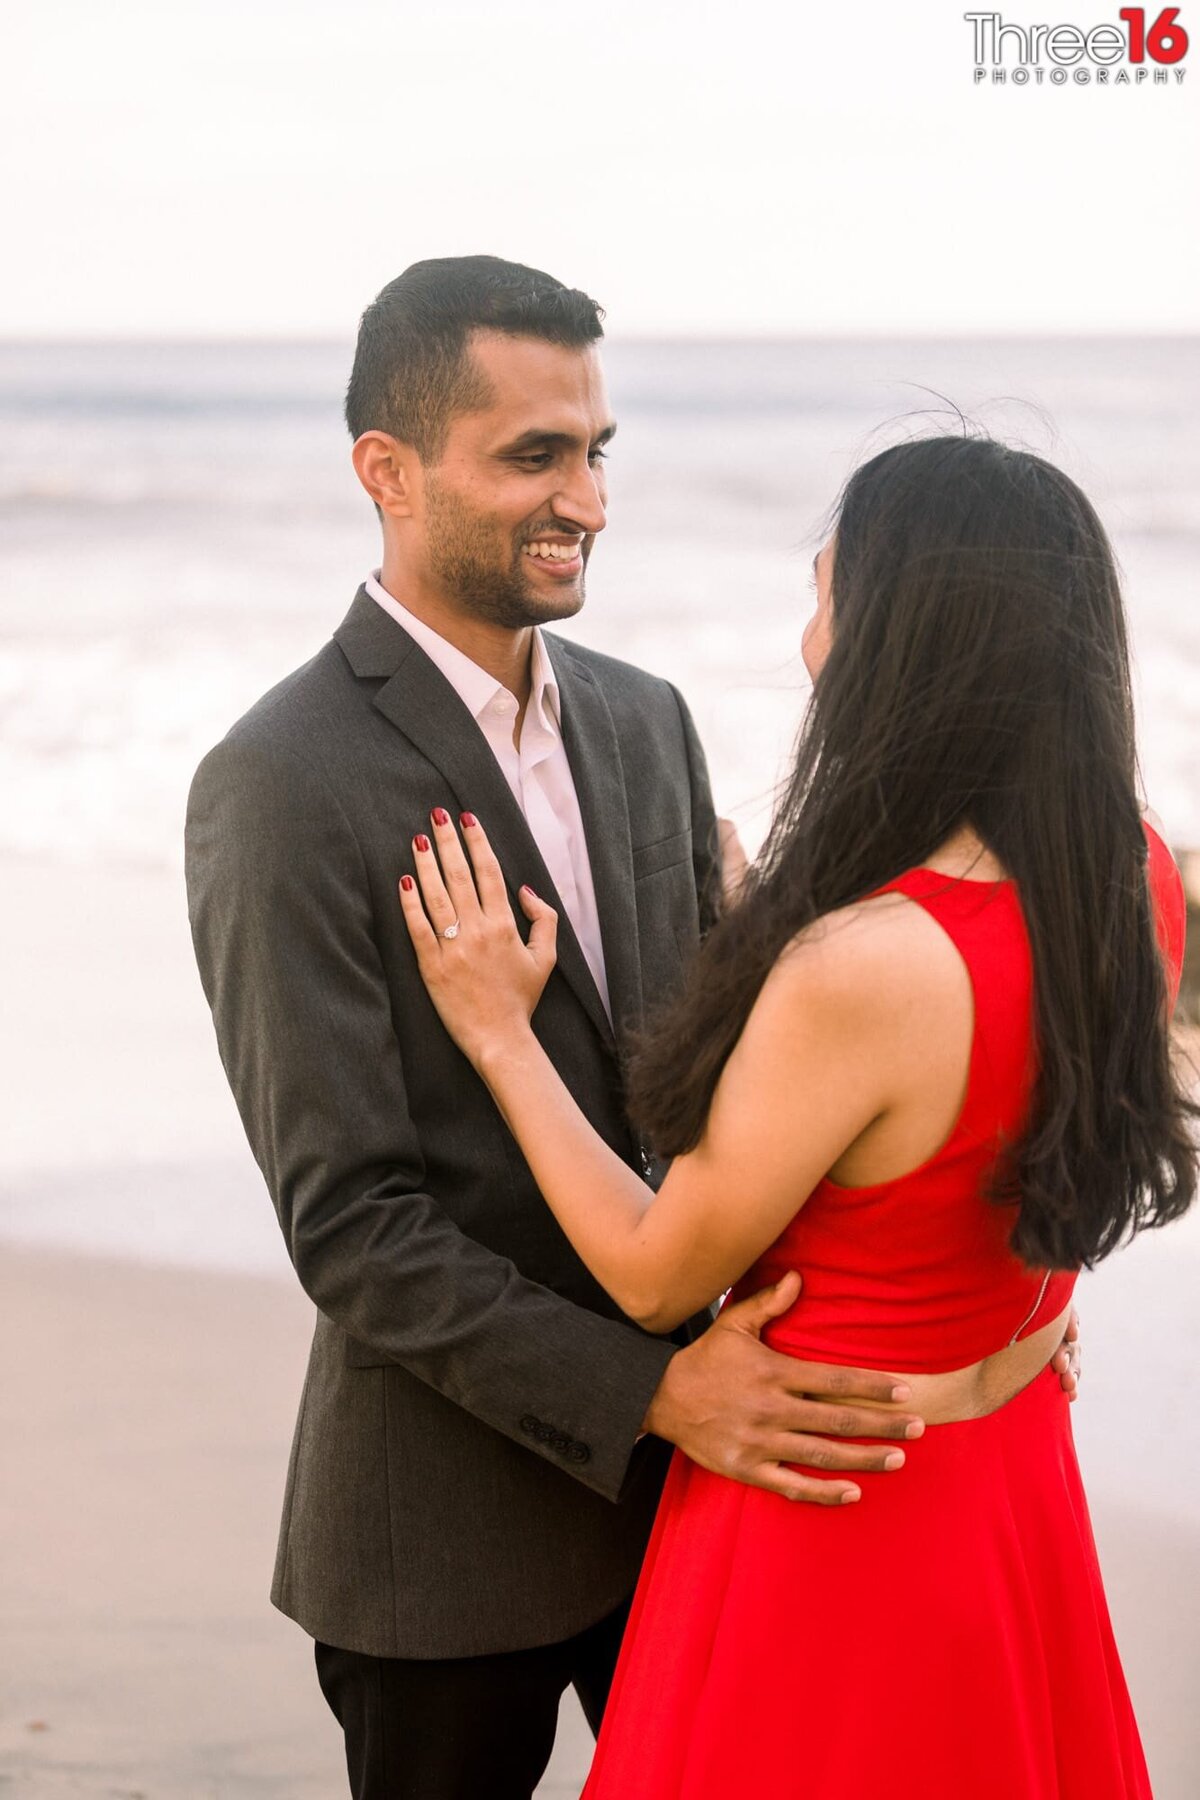 Newly engaged couple hold each other and smile at one another after the proposal